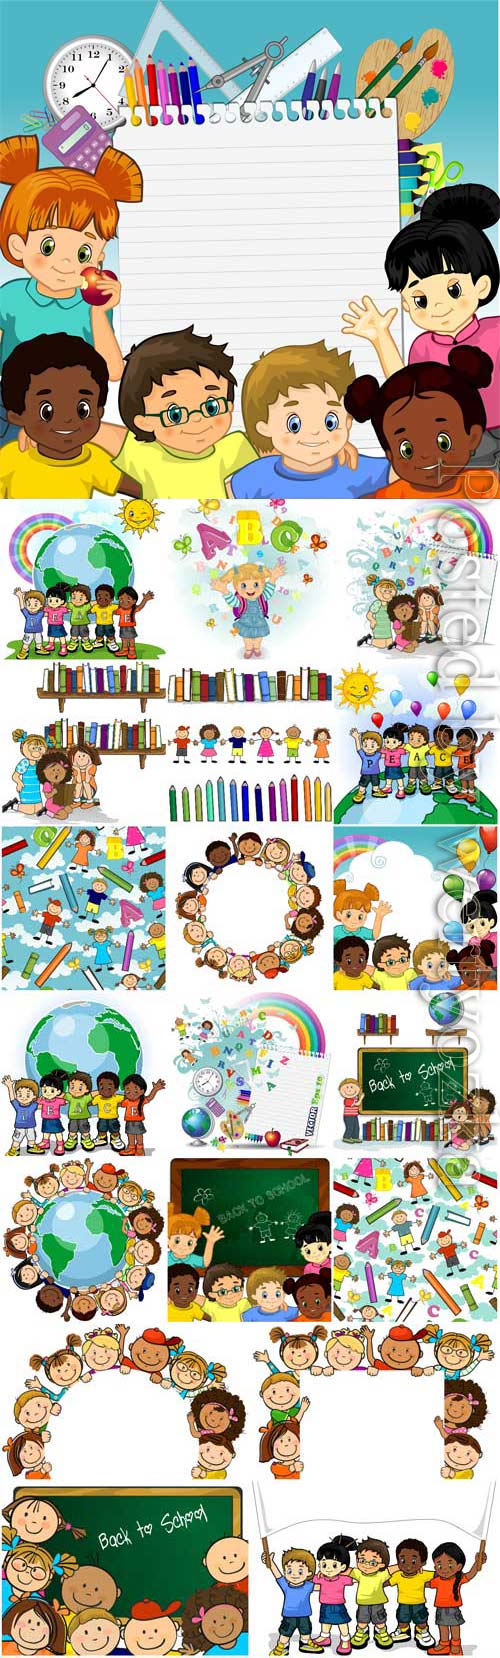 Children of different countries of the world in vector